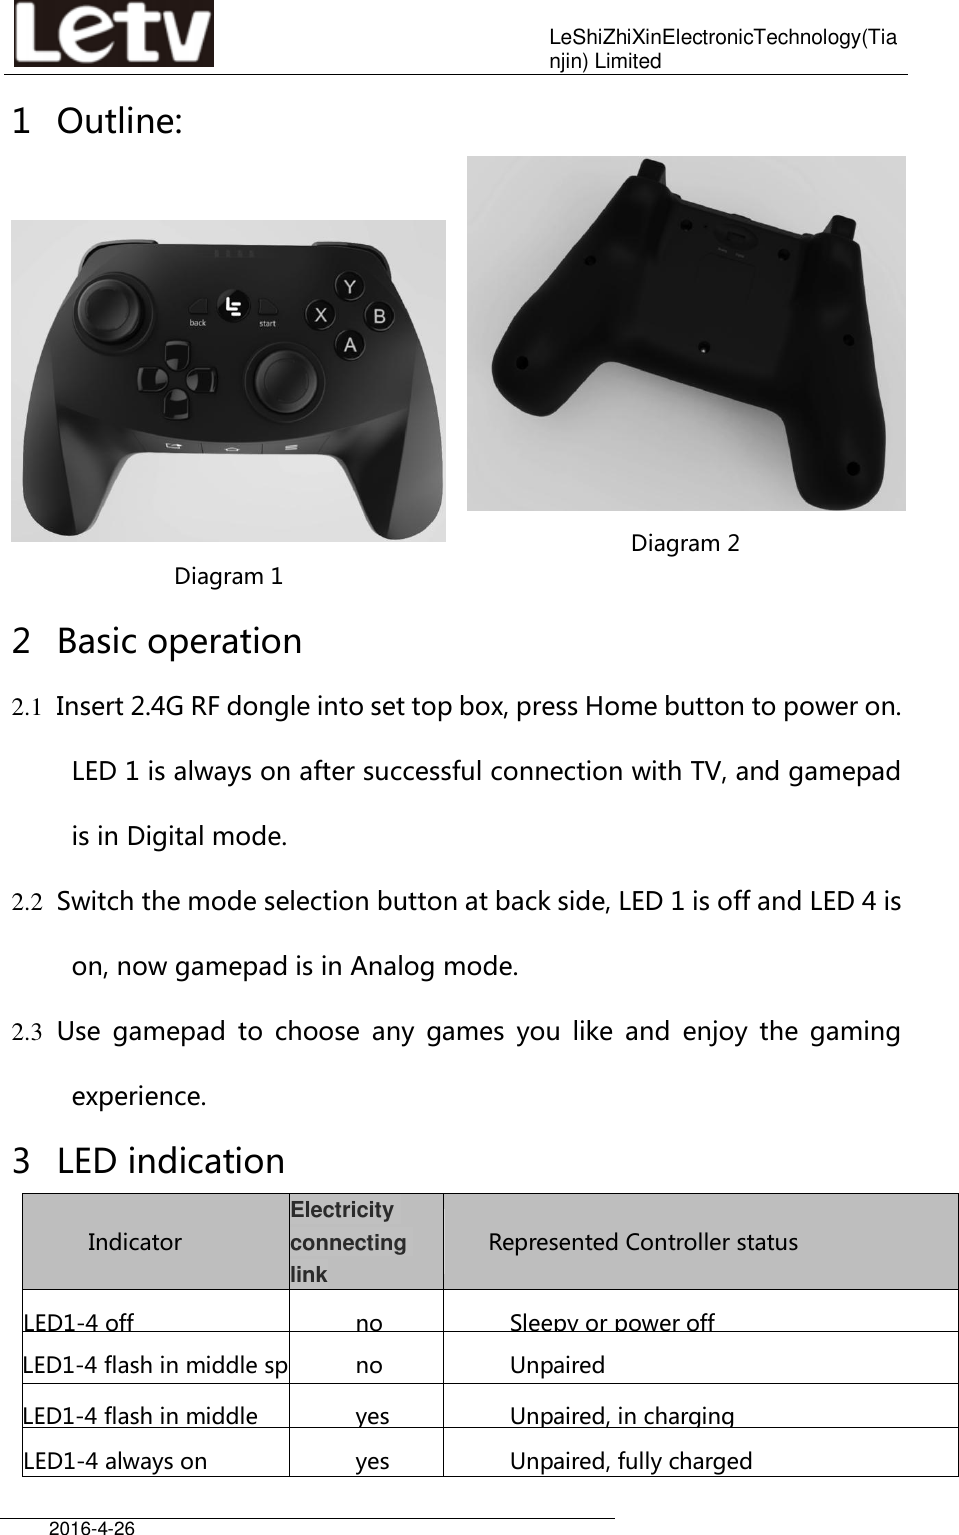    LeShiZhiXinElectronicTechnology(Tianjin) Limited  2016-4-26     1 Outline: · Diagram 1    Diagram 2 2 Basic operation 2.1 Insert 2.4G RF dongle into set top box, press Home button to power on. LED 1 is always on after successful connection with TV, and gamepad is in Digital mode. 2.2 Switch the mode selection button at back side, LED 1 is off and LED 4 is on, now gamepad is in Analog mode. 2.3 Use  gamepad  to  choose  any  games  you  like  and  enjoy  the  gaming experience. 3 LED indication Indicator Electricity connecting link     Represented Controller status LED1-4 off no Sleepy or power off LED1-4 flash in middle speed no Unpaired LED1-4 flash in middle speed yes Unpaired, in charging LED1-4 always on yes Unpaired, fully charged 